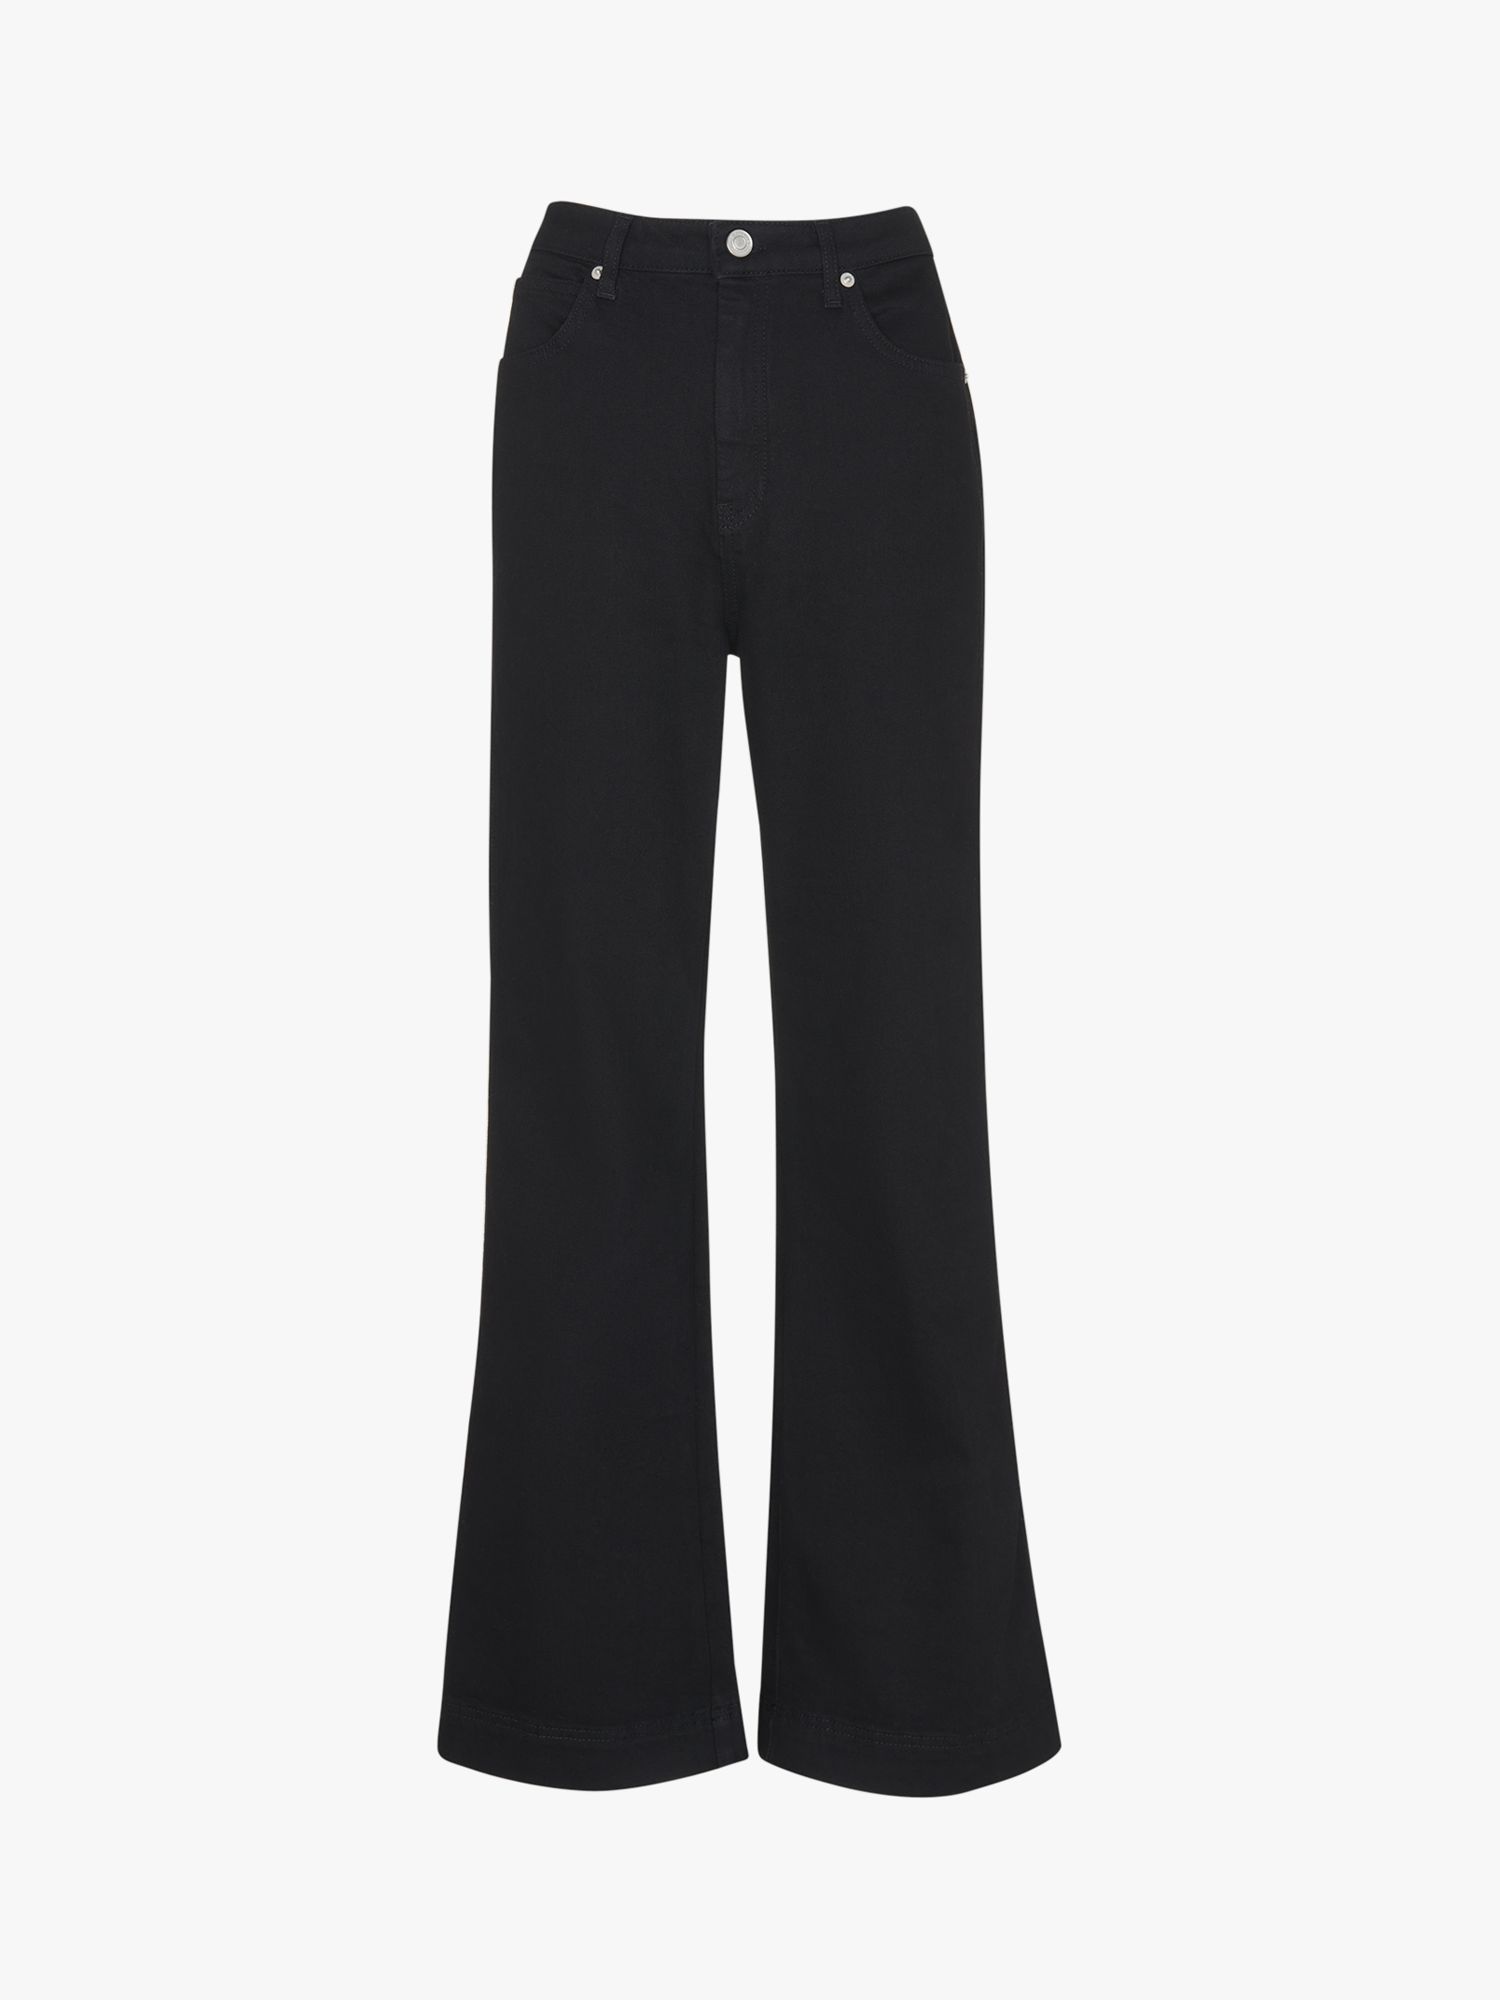 Whistles Lucy Stretched Flared Jeans, Black, 26